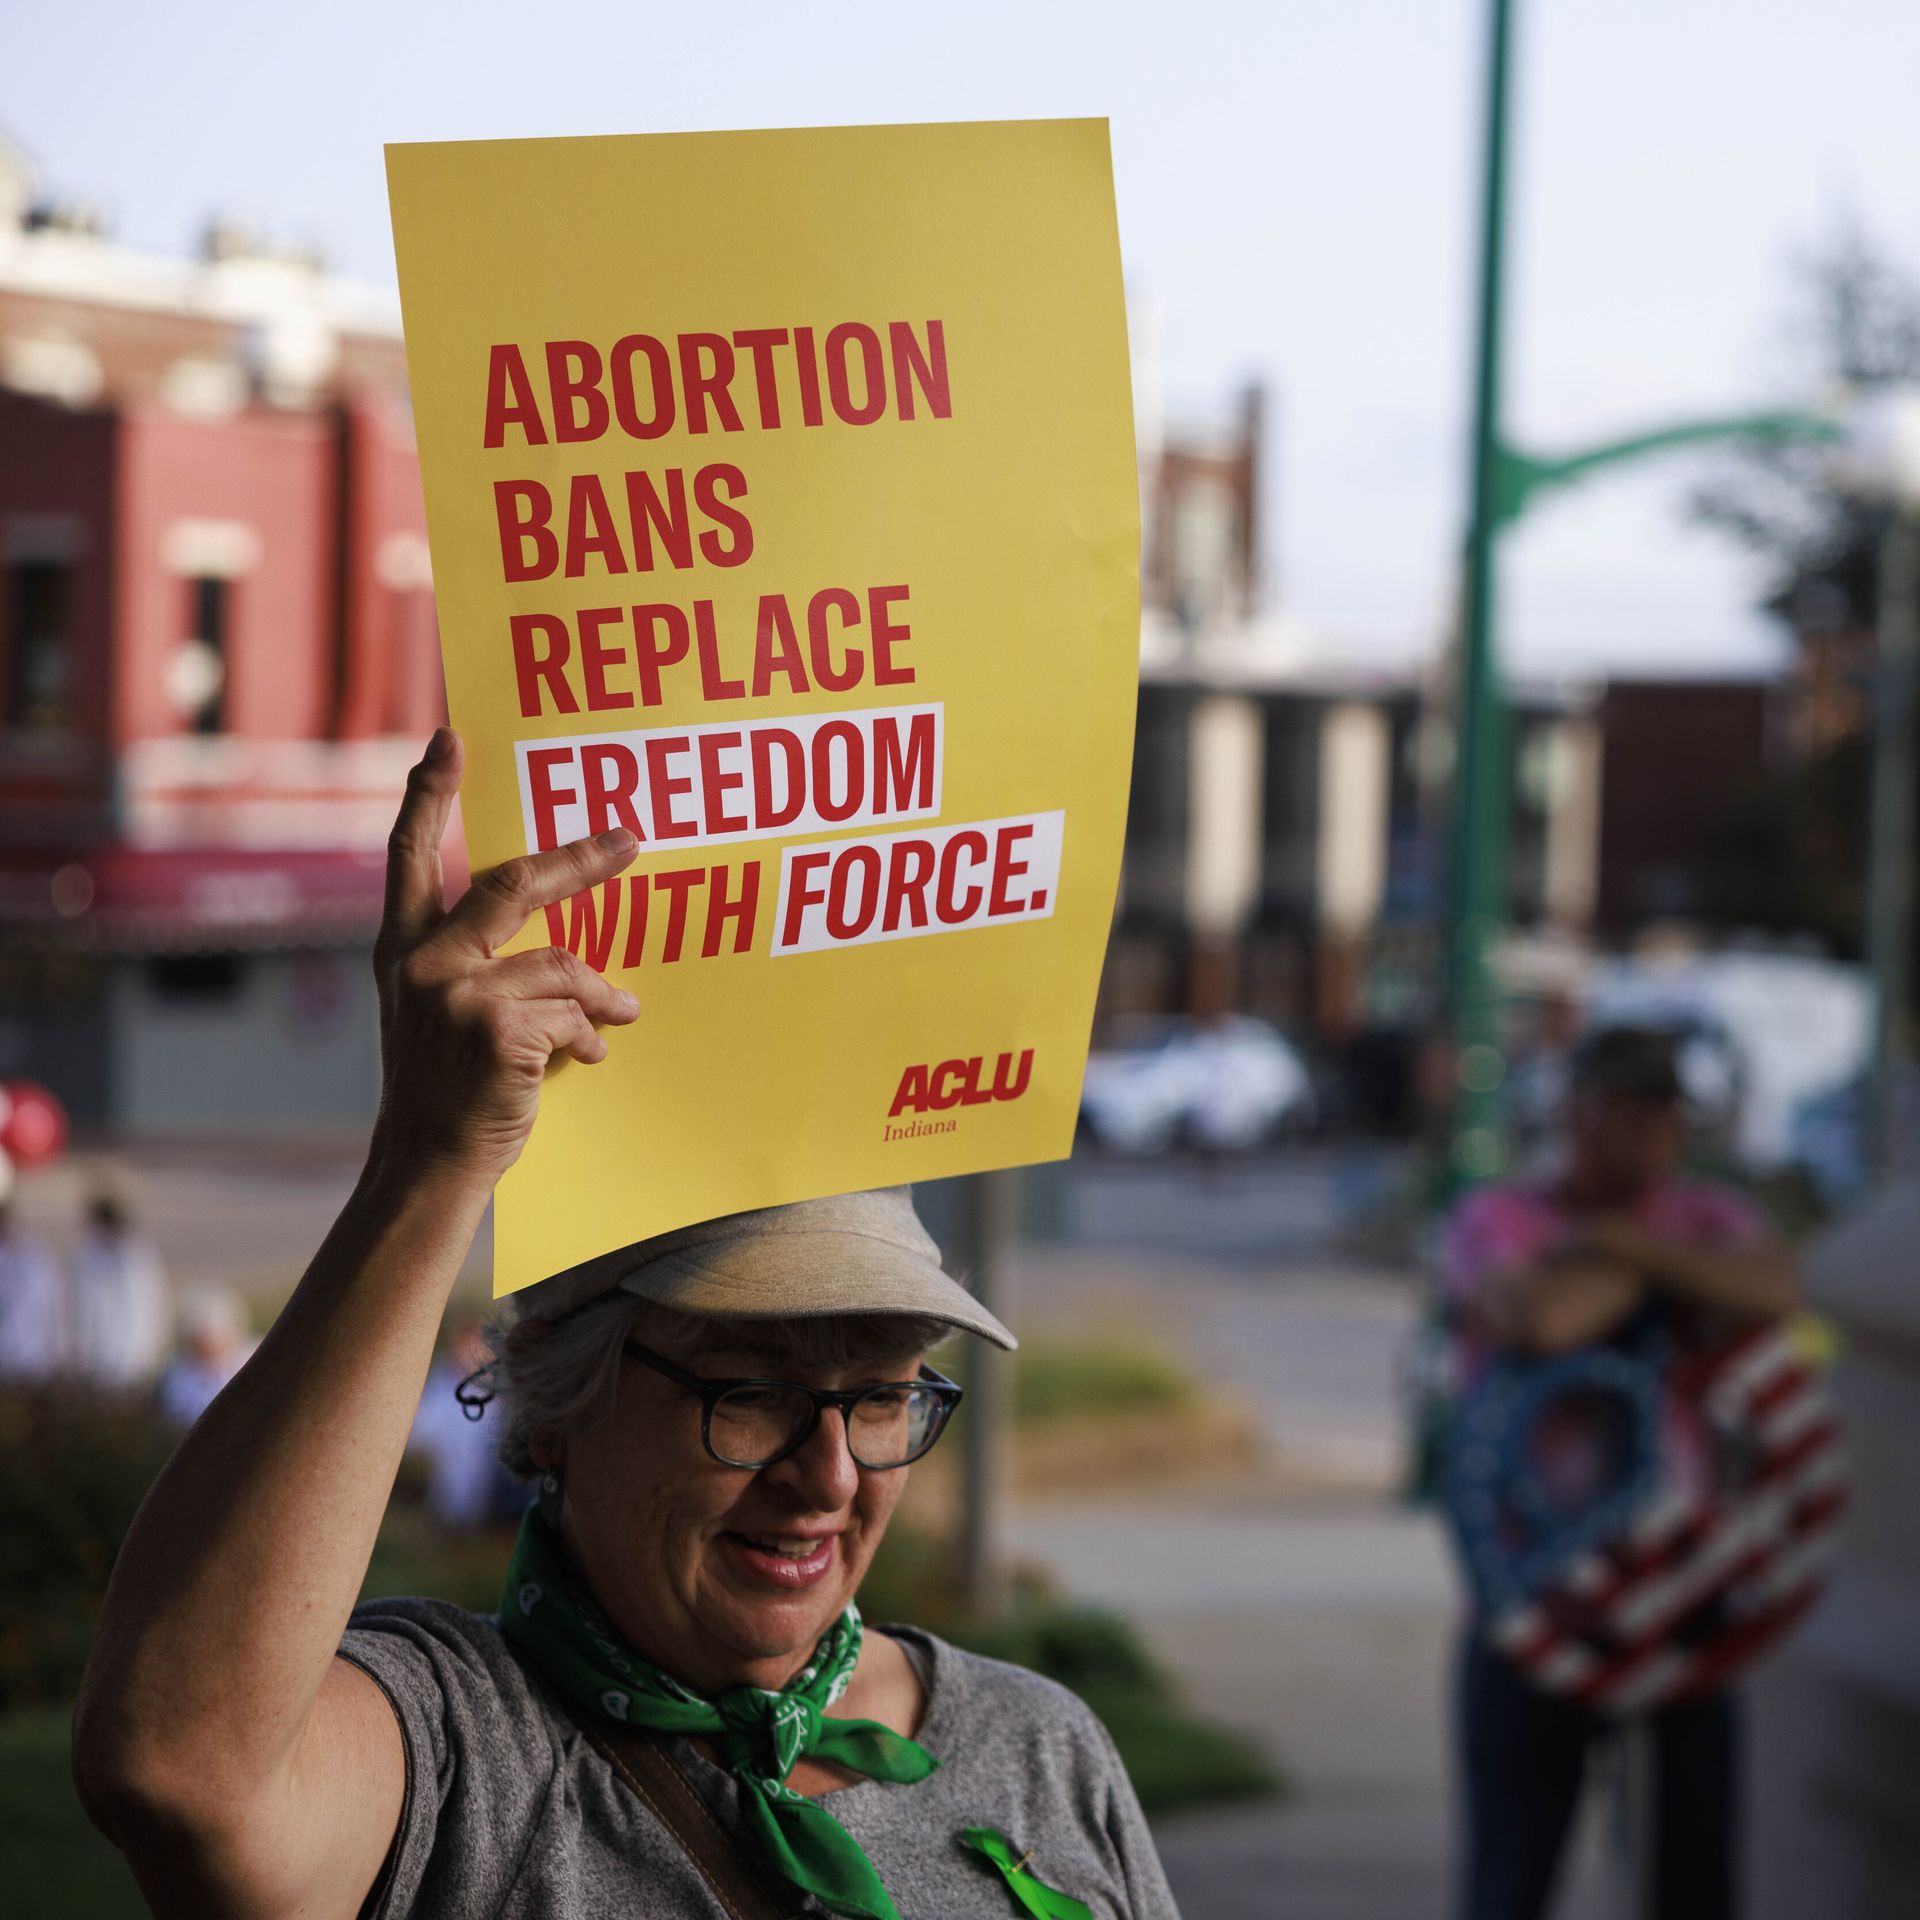 Picture of a person holding a yellow sign that says "abortion bans replace freedom with force"